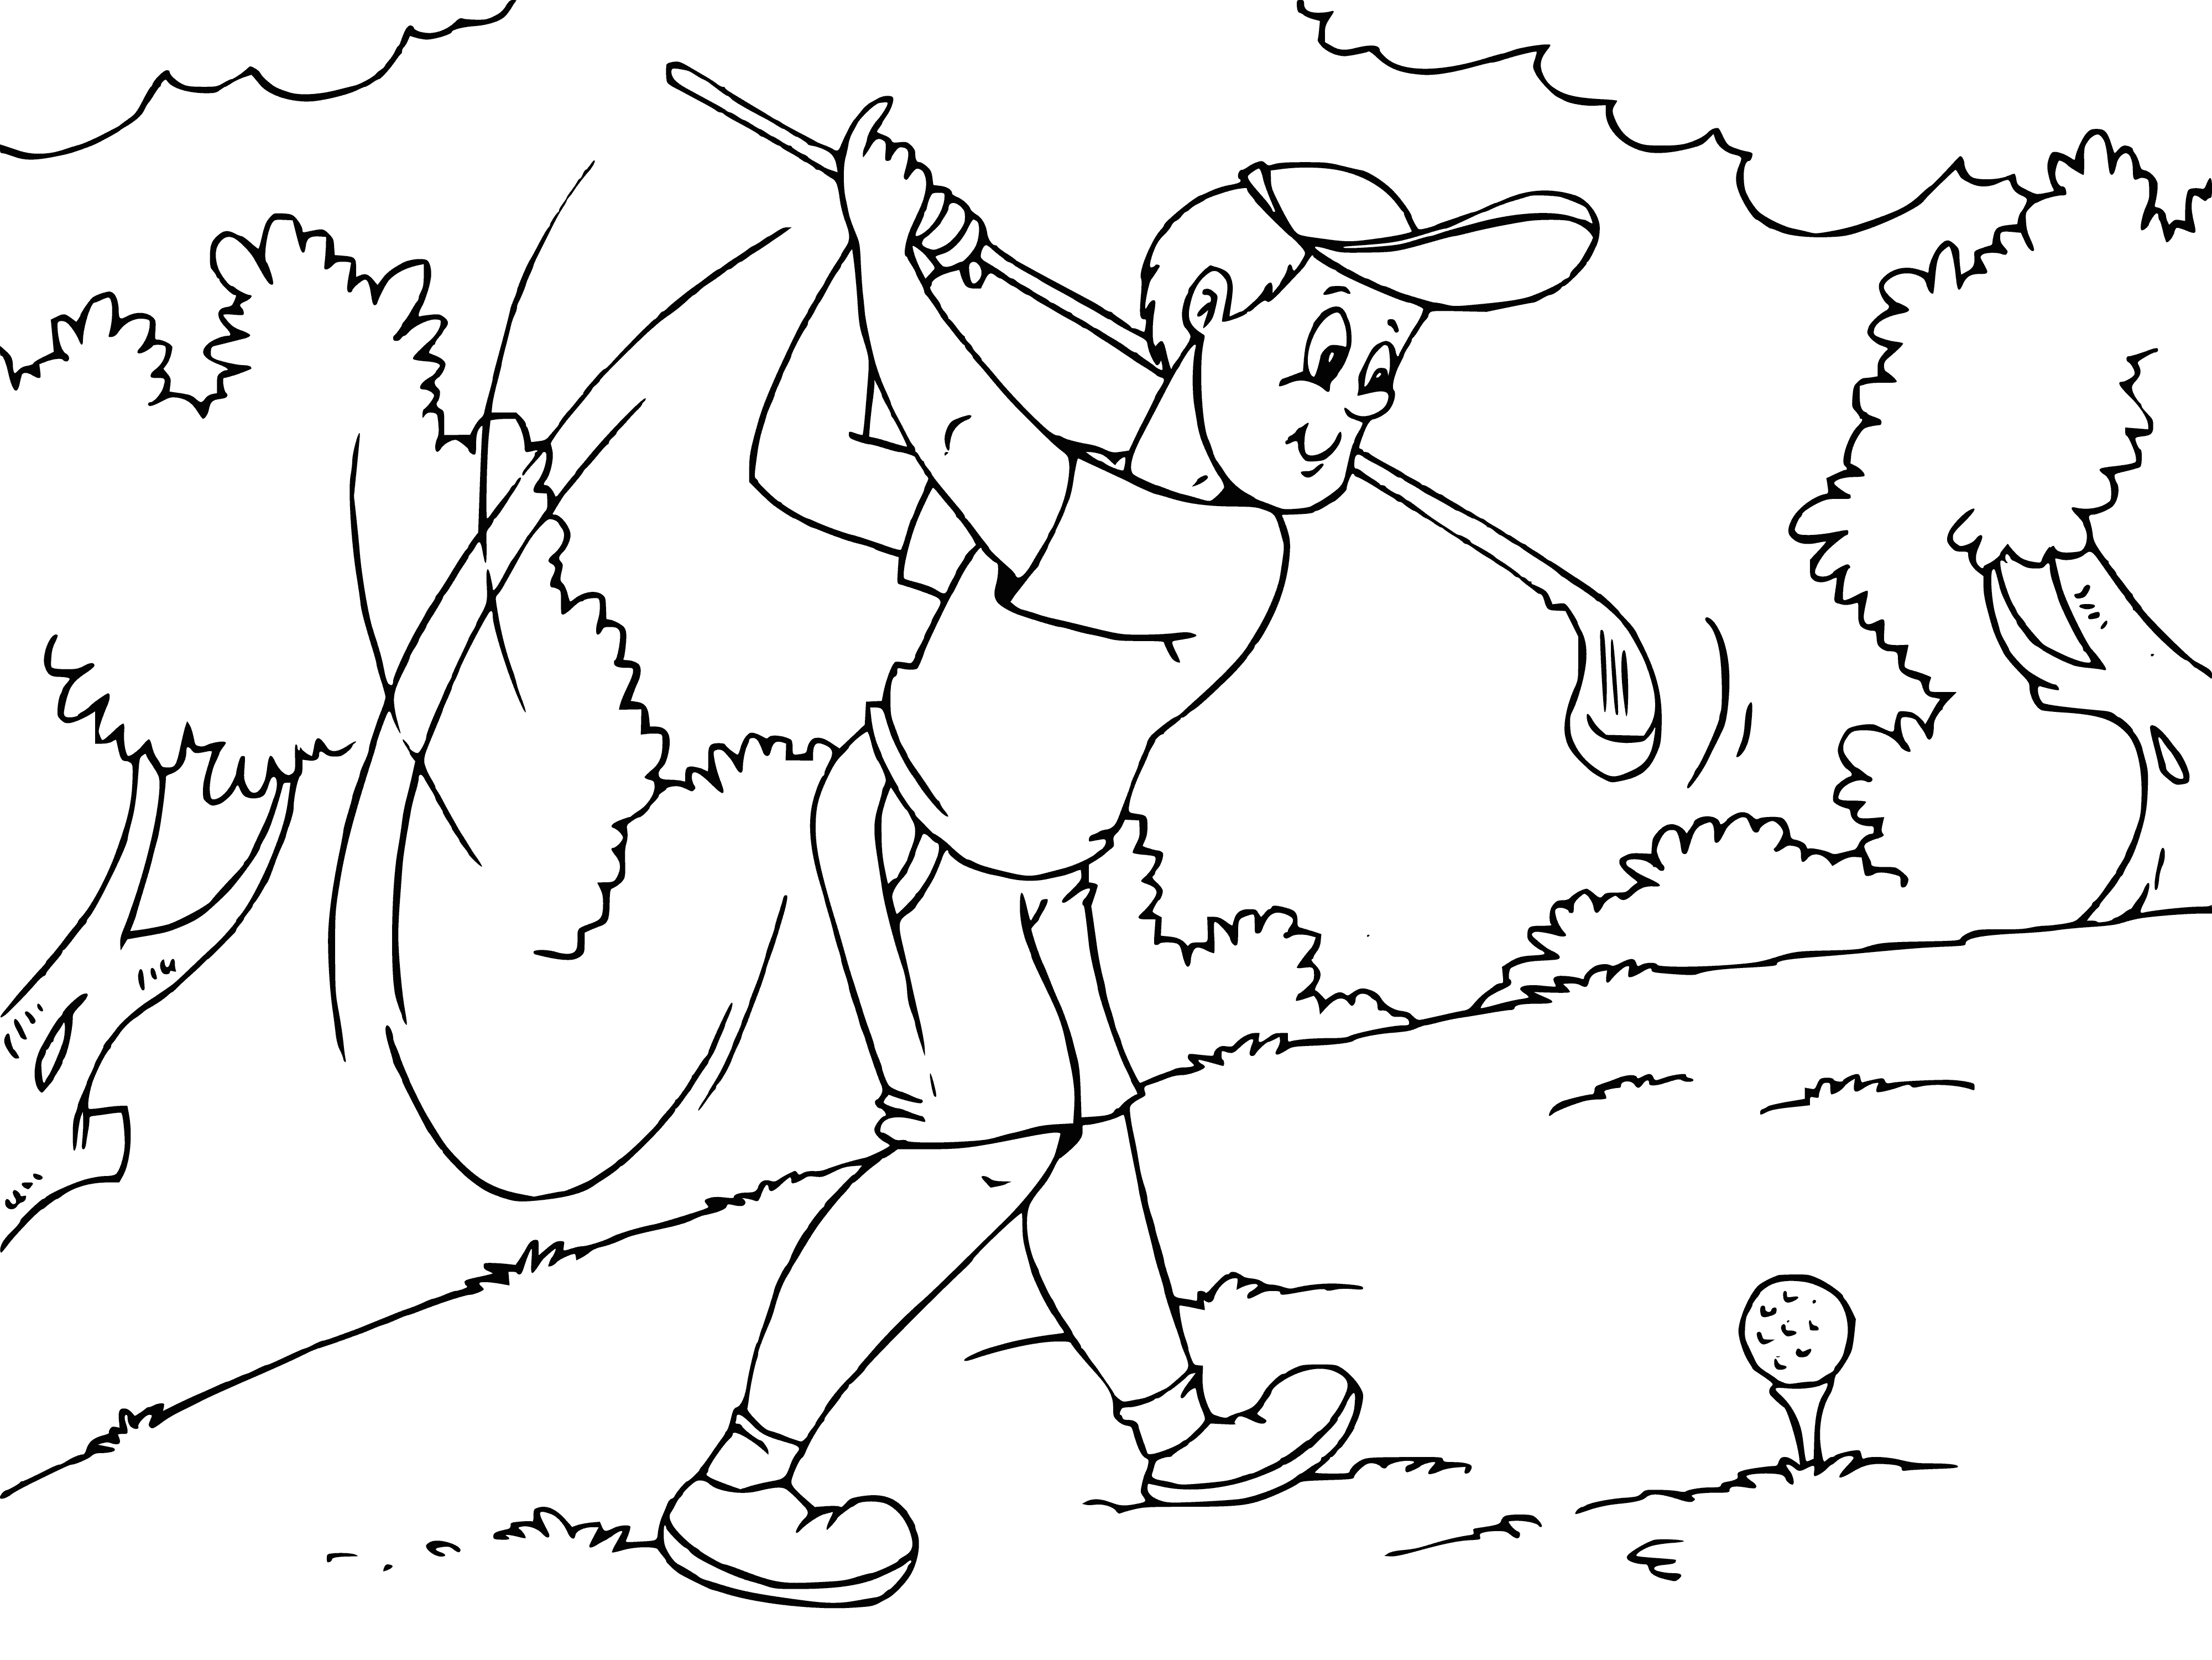 coloring page: Golf cart travels down a fairway filled with trees and a distant flagstick, surrounded by well-manicured grass.